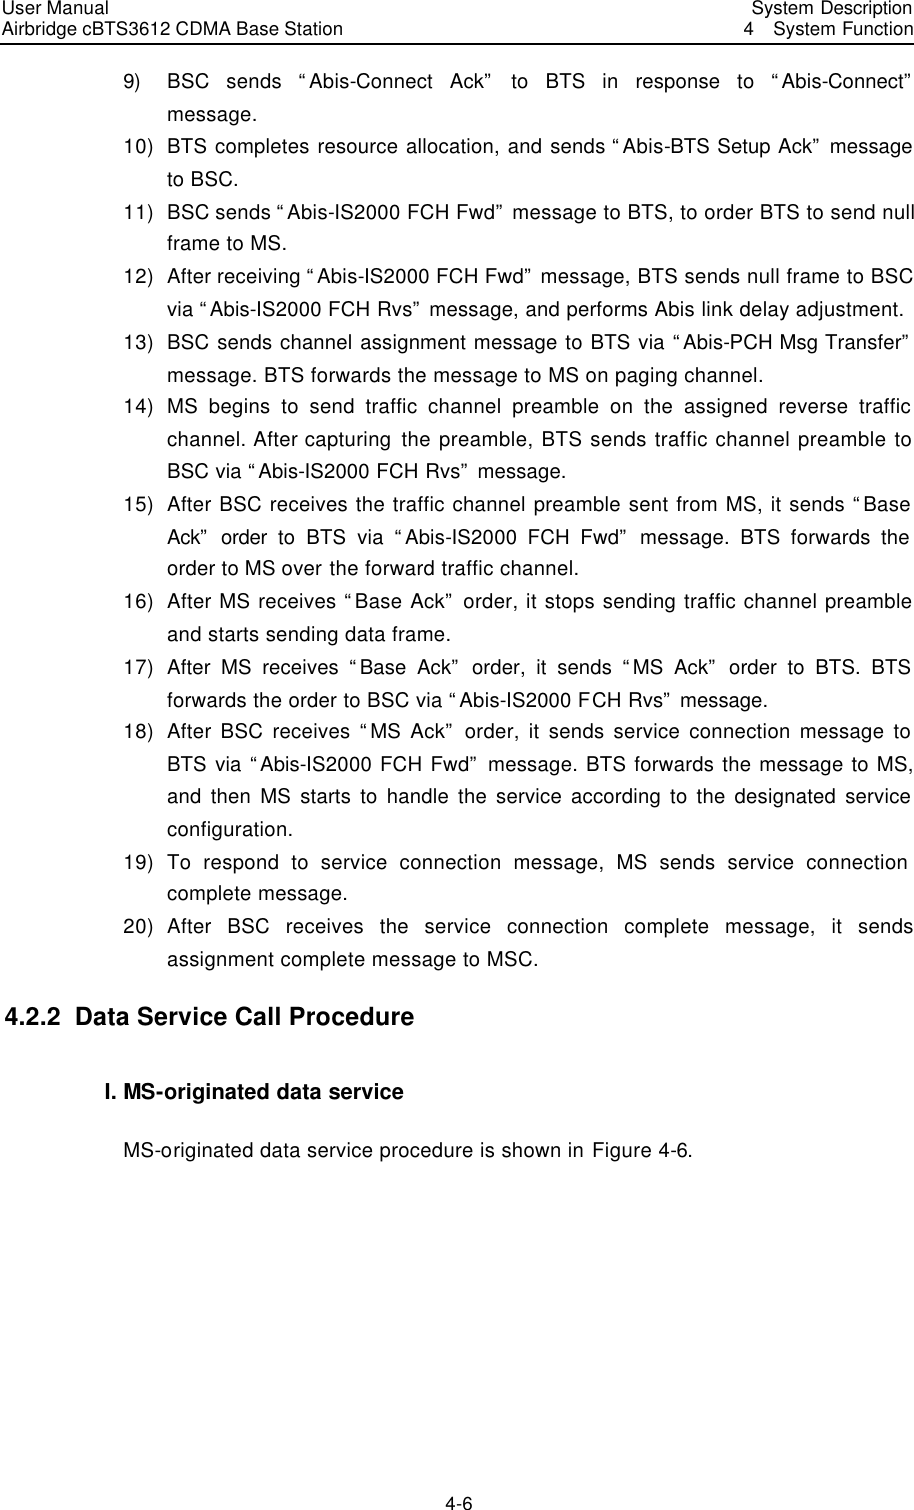 User Manual Airbridge cBTS3612 CDMA Base Station   System Description4  System Function 4-6 9) BSC sends “Abis-Connect Ack” to BTS in response to “Abis-Connect” message.   10) BTS completes resource allocation, and sends “Abis-BTS Setup Ack” message to BSC.   11) BSC sends “Abis-IS2000 FCH Fwd” message to BTS, to order BTS to send null frame to MS.   12) After receiving “Abis-IS2000 FCH Fwd” message, BTS sends null frame to BSC via “Abis-IS2000 FCH Rvs” message, and performs Abis link delay adjustment.   13) BSC sends channel assignment message to BTS via “Abis-PCH Msg Transfer” message. BTS forwards the message to MS on paging channel.   14) MS begins to send traffic channel preamble on the assigned reverse traffic channel. After capturing the preamble, BTS sends traffic channel preamble to BSC via “Abis-IS2000 FCH Rvs” message.   15) After BSC receives the traffic channel preamble sent from MS, it sends “Base Ack” order to BTS via “Abis-IS2000 FCH Fwd” message. BTS forwards the order to MS over the forward traffic channel.   16) After MS receives “Base Ack” order, it stops sending traffic channel preamble and starts sending data frame.   17) After MS receives “Base Ack” order, it sends “MS Ack” order to BTS. BTS forwards the order to BSC via “Abis-IS2000 FCH Rvs” message.   18) After BSC receives “MS Ack” order, it sends service connection message to BTS via “Abis-IS2000 FCH Fwd” message. BTS forwards the message to MS, and then MS starts to handle the service according to the designated service configuration.   19) To respond to service connection message, MS sends service connection complete message.   20) After BSC receives the service connection complete message, it sends assignment complete message to MSC.   4.2.2  Data Service Call Procedure  I. MS-originated data service   MS-originated data service procedure is shown in Figure 4-6. 